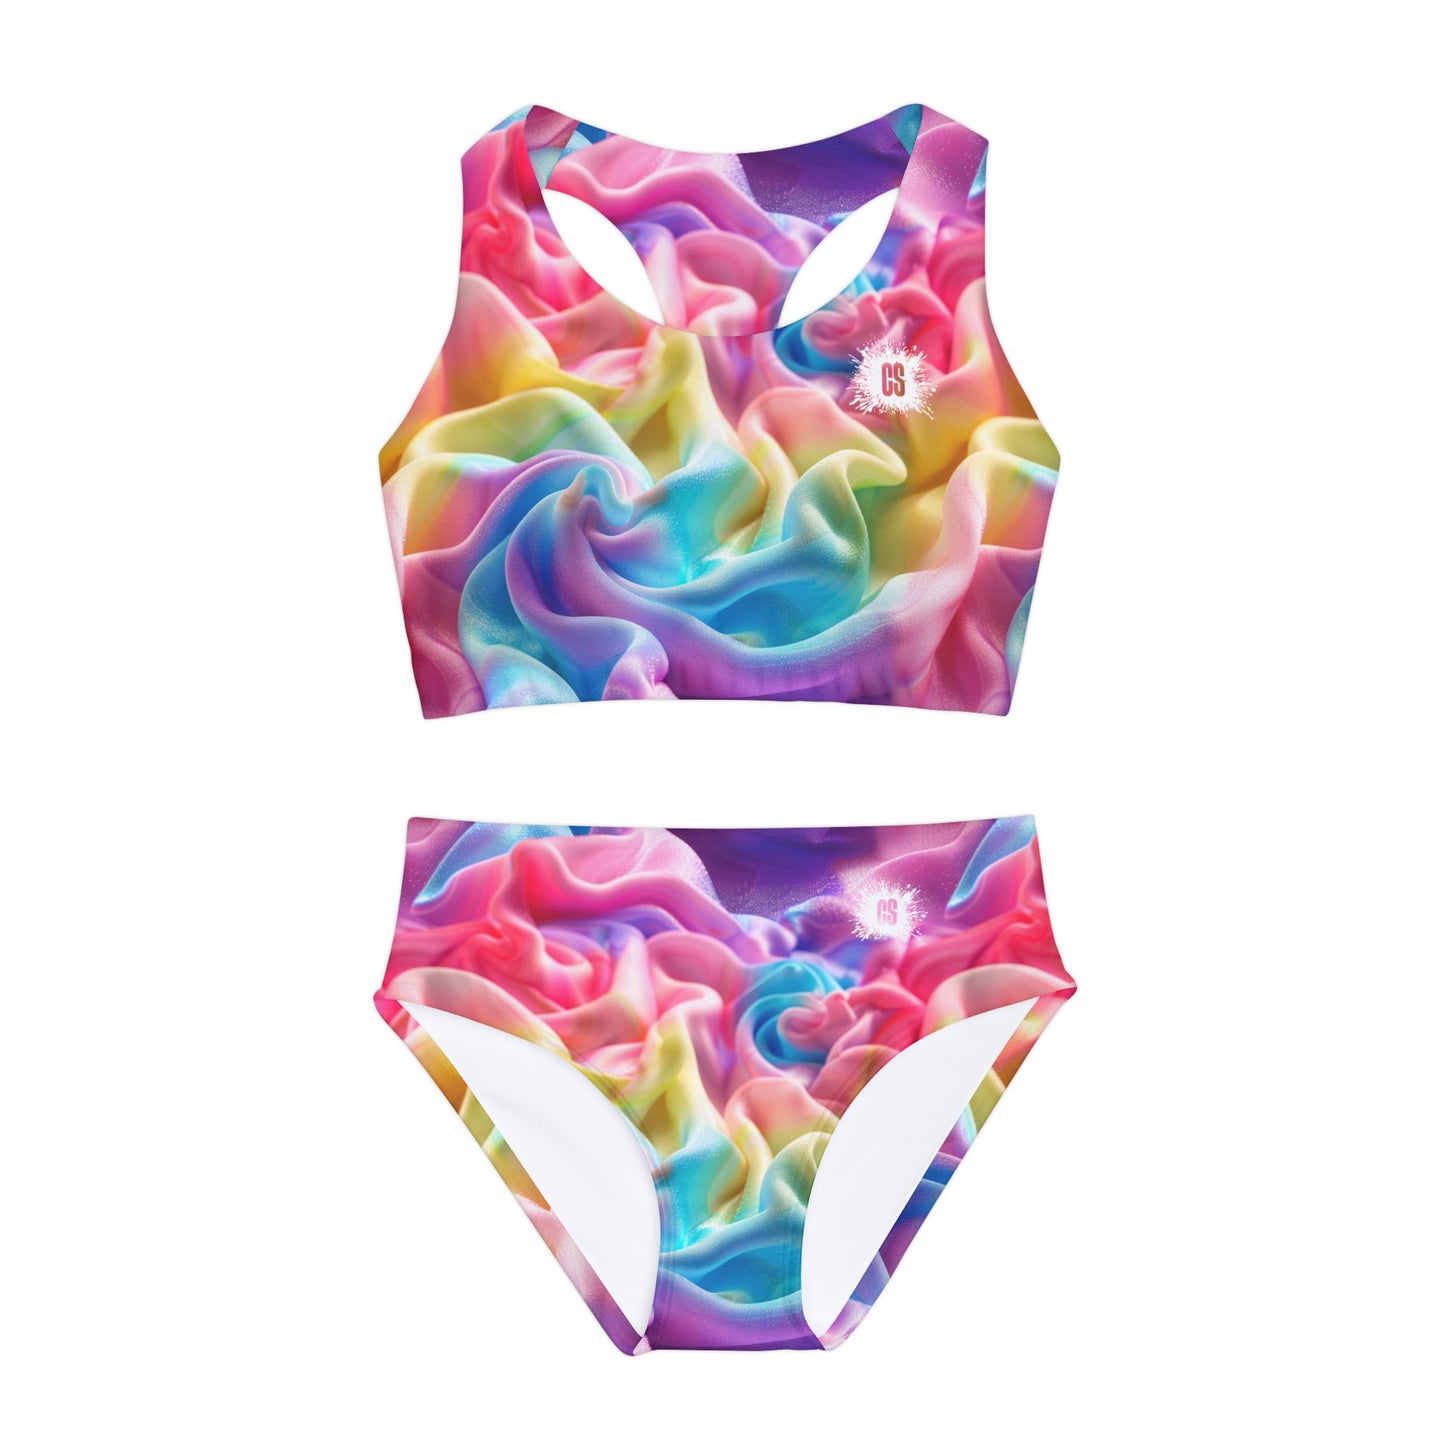 Cotton Candy Clouds Girls Two Piece Swimsuit